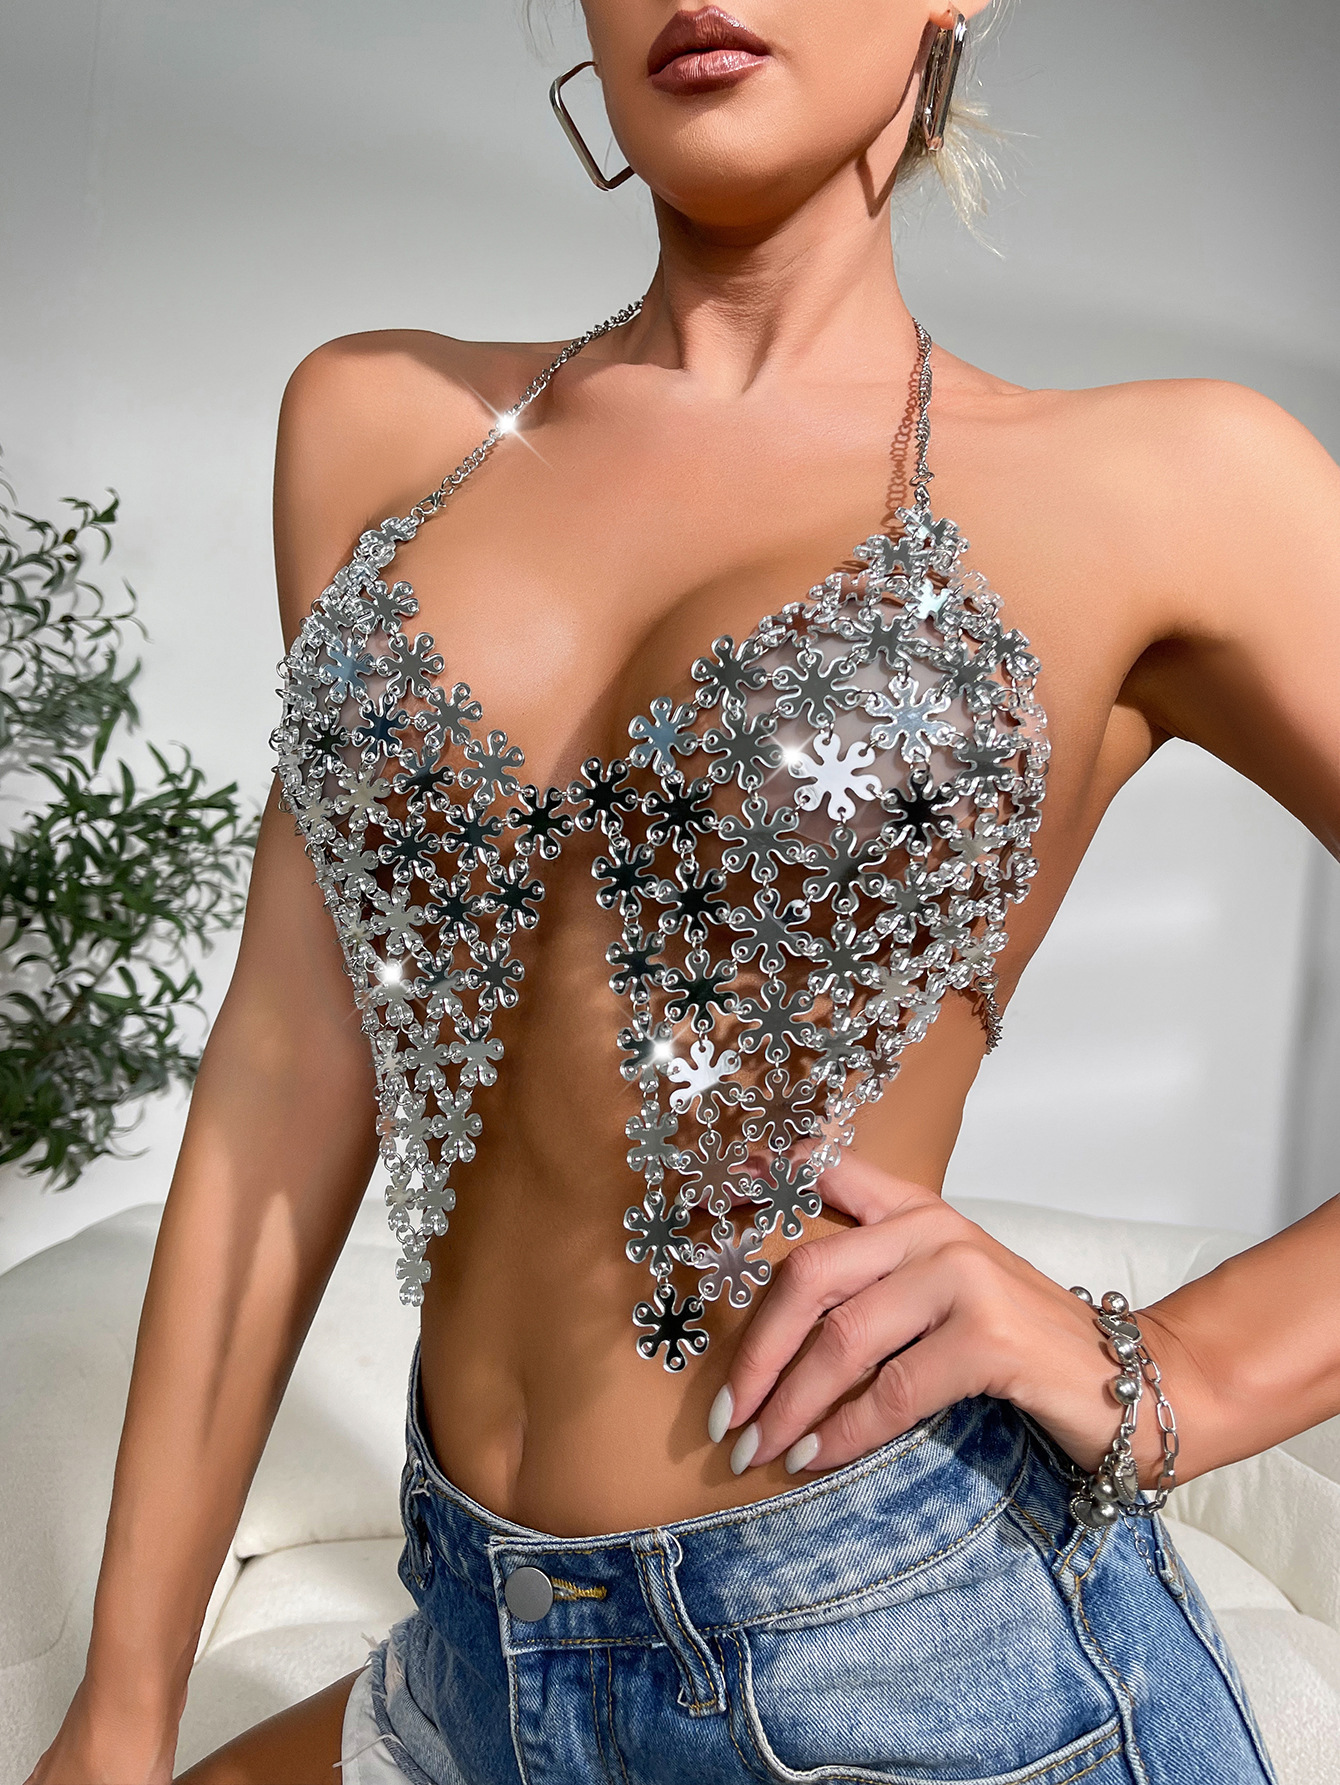 

Women's Tanks Sexy y2k clothes halter metal sequin tops women summer see through Crop top womens rave beach party tank Top night Club outfits, Silver